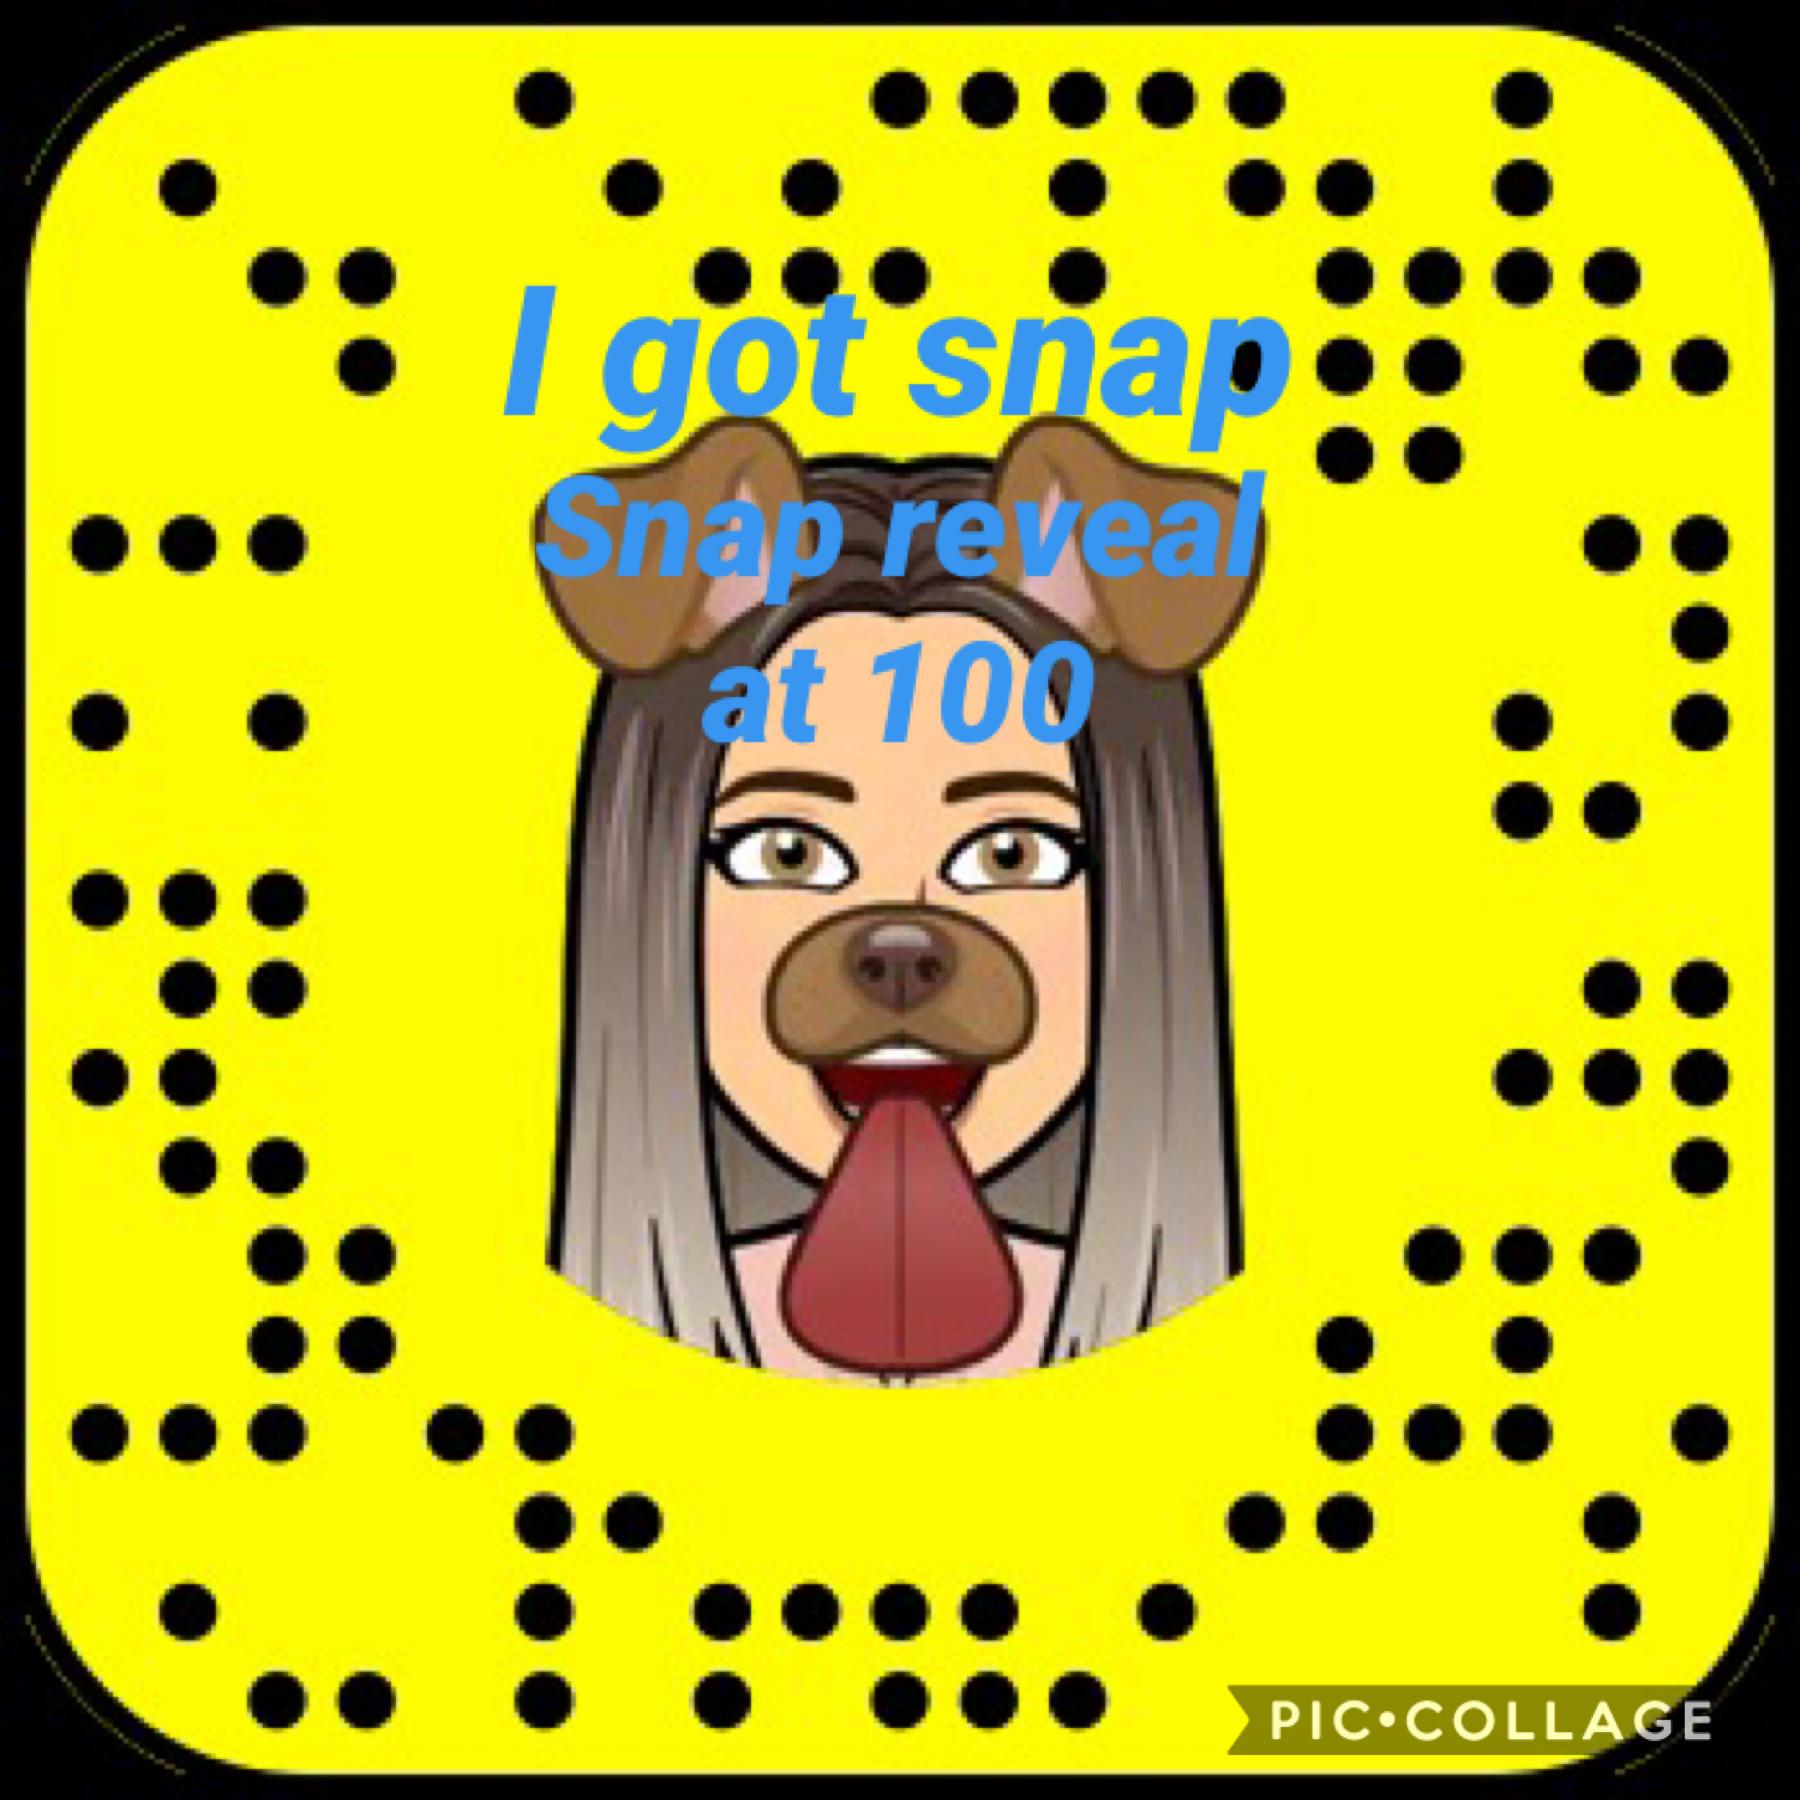 #snapchat so guys I’ve got snap and I’ll be doing a name reveal and will be friending you guys when I reach 100 followers oh guys also I will follow everyone who follows me until we reach 100 followers we are so close just 28 more of you guys to go we can